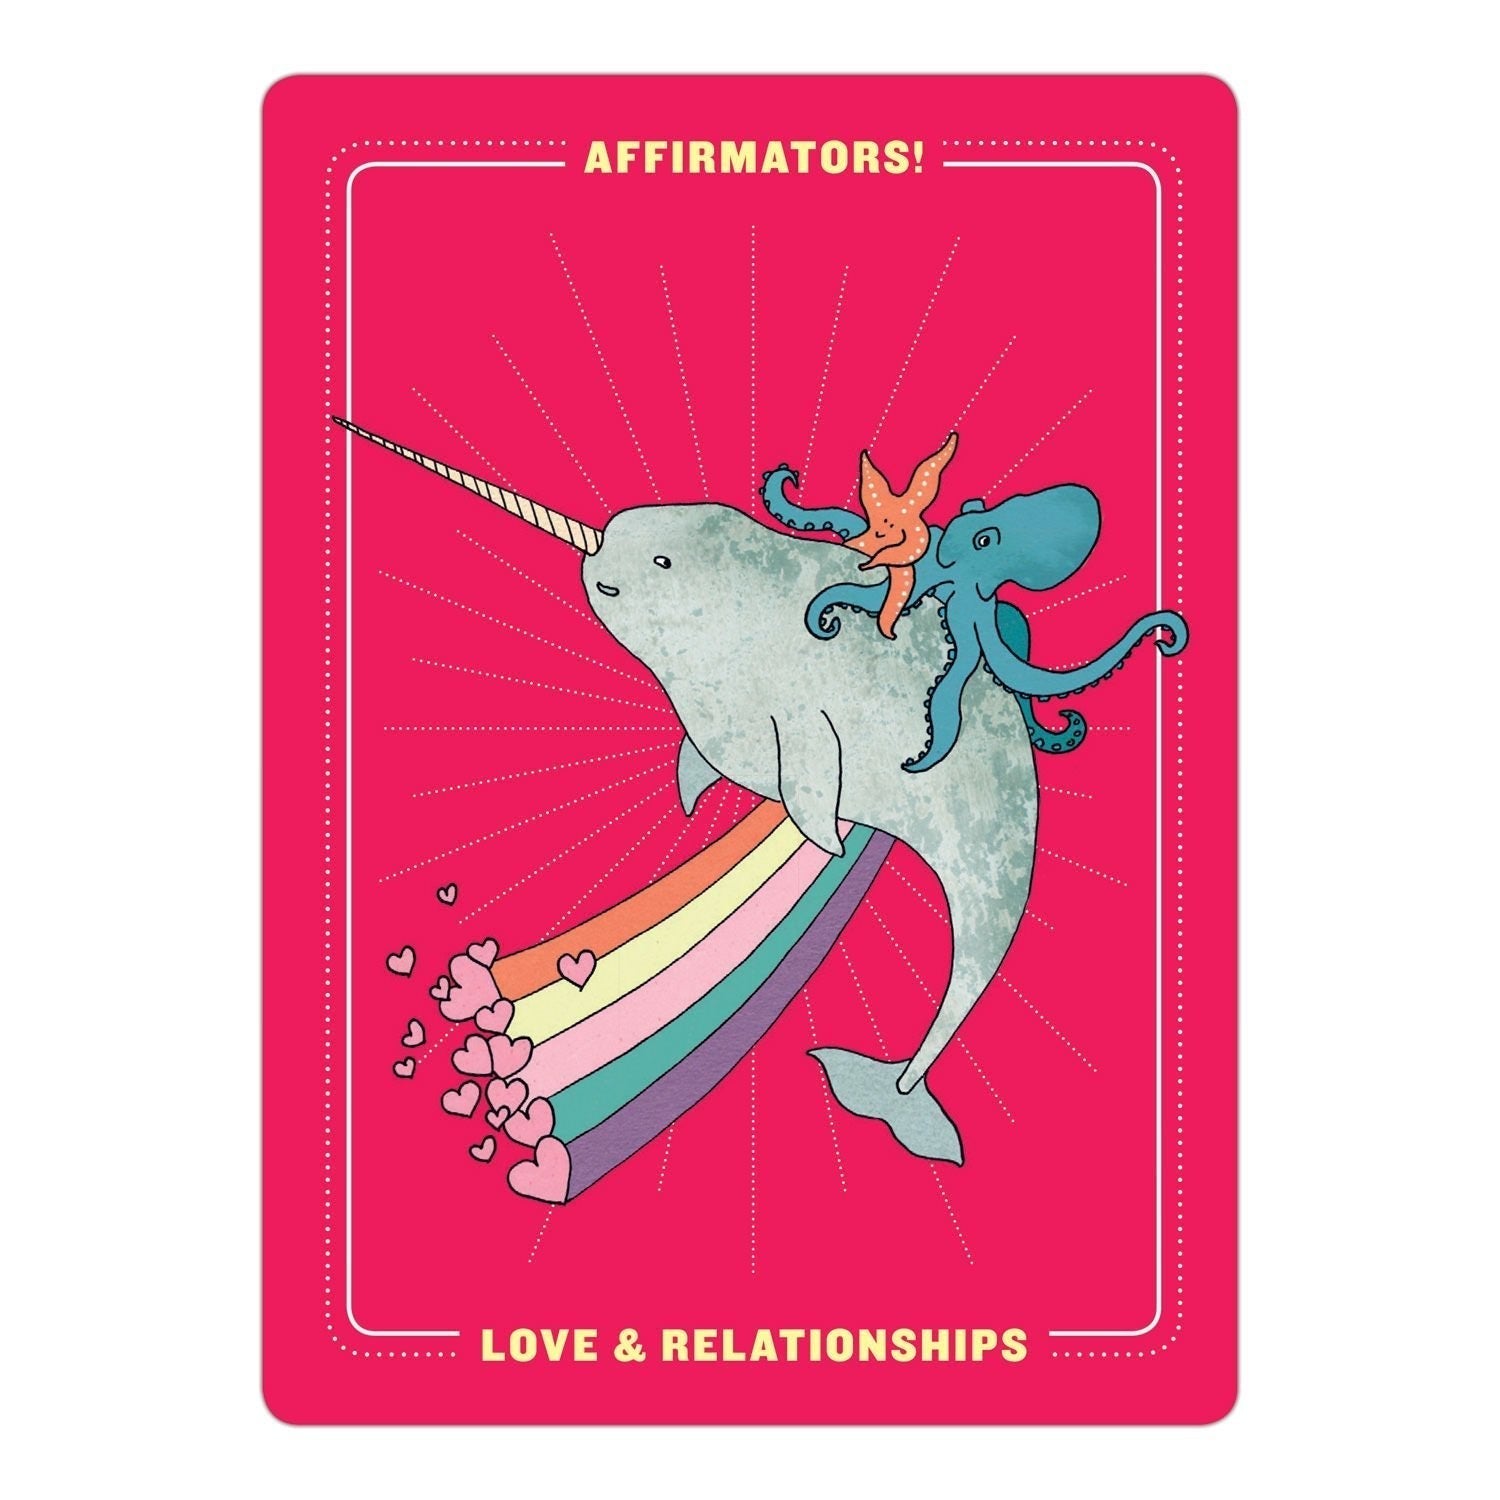 Affirmators! Love & Relationships: 50 Affirmation Cards to Help You Help Yourself—Without the Self-Helpy Ness!